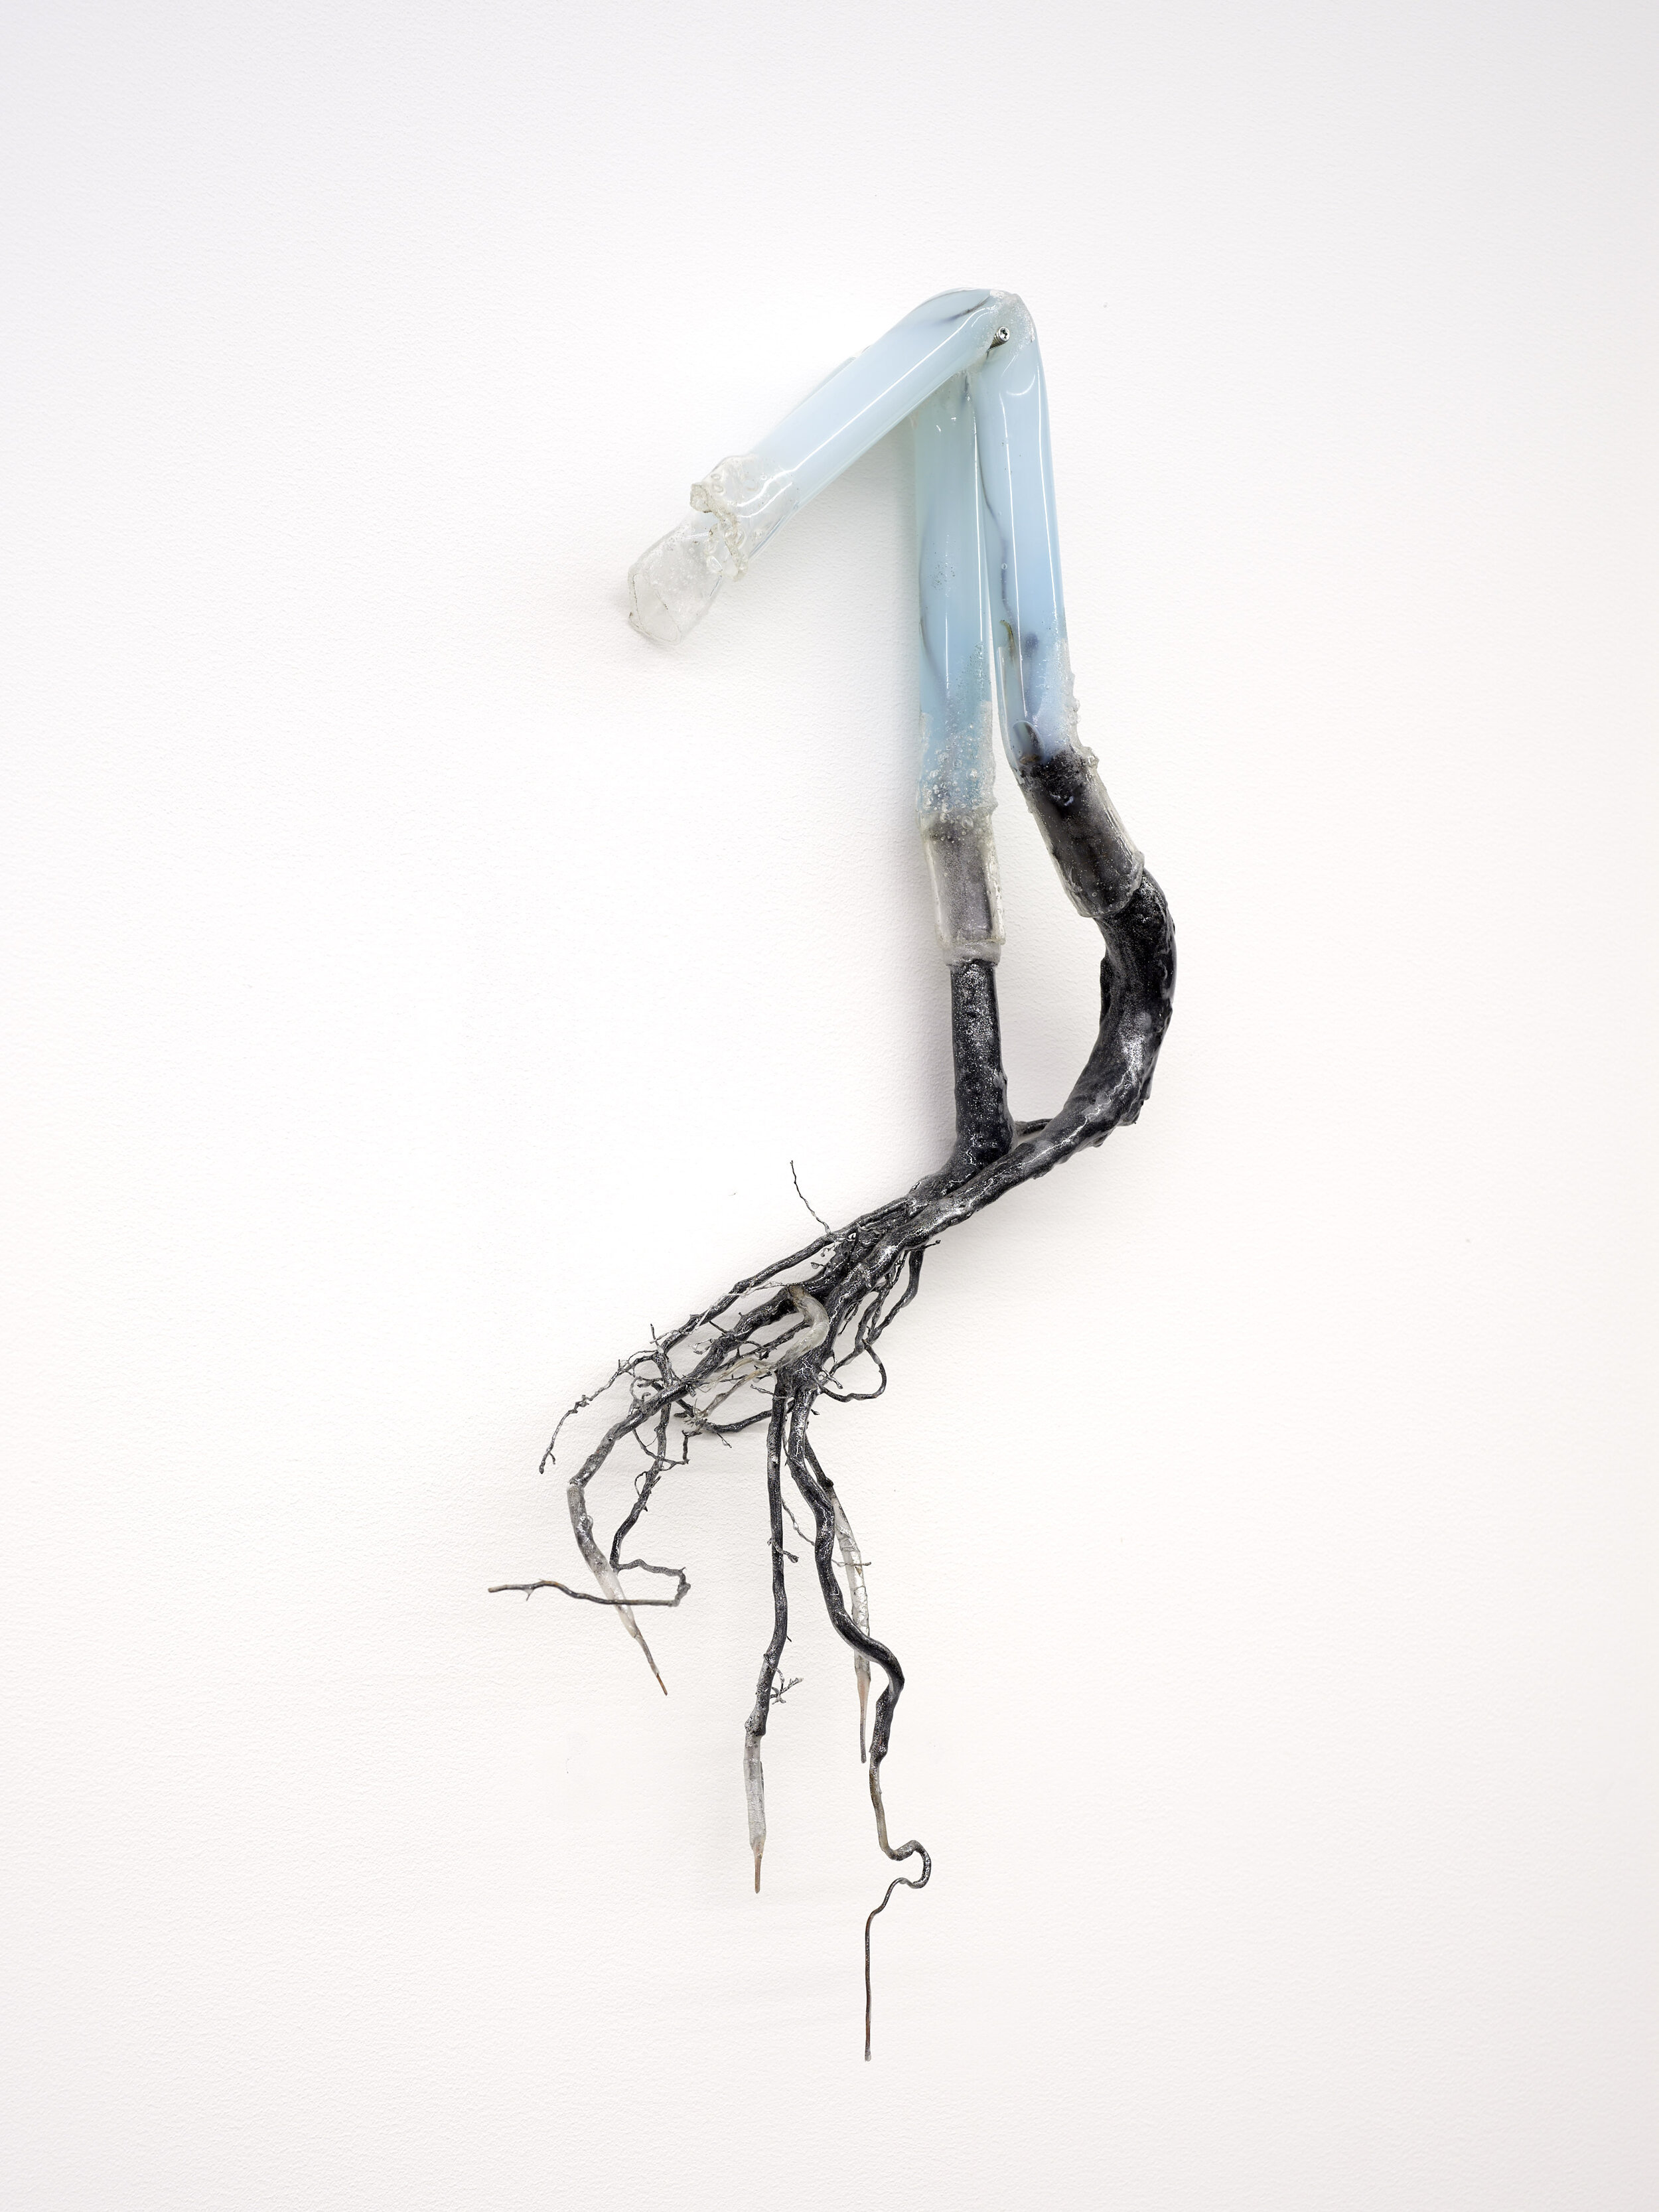  Adriano Amaral,  Untitled , 2019, Acrylic tubes, roots, prosthetic rubber, electric cables, aluminum powder, 63x33  